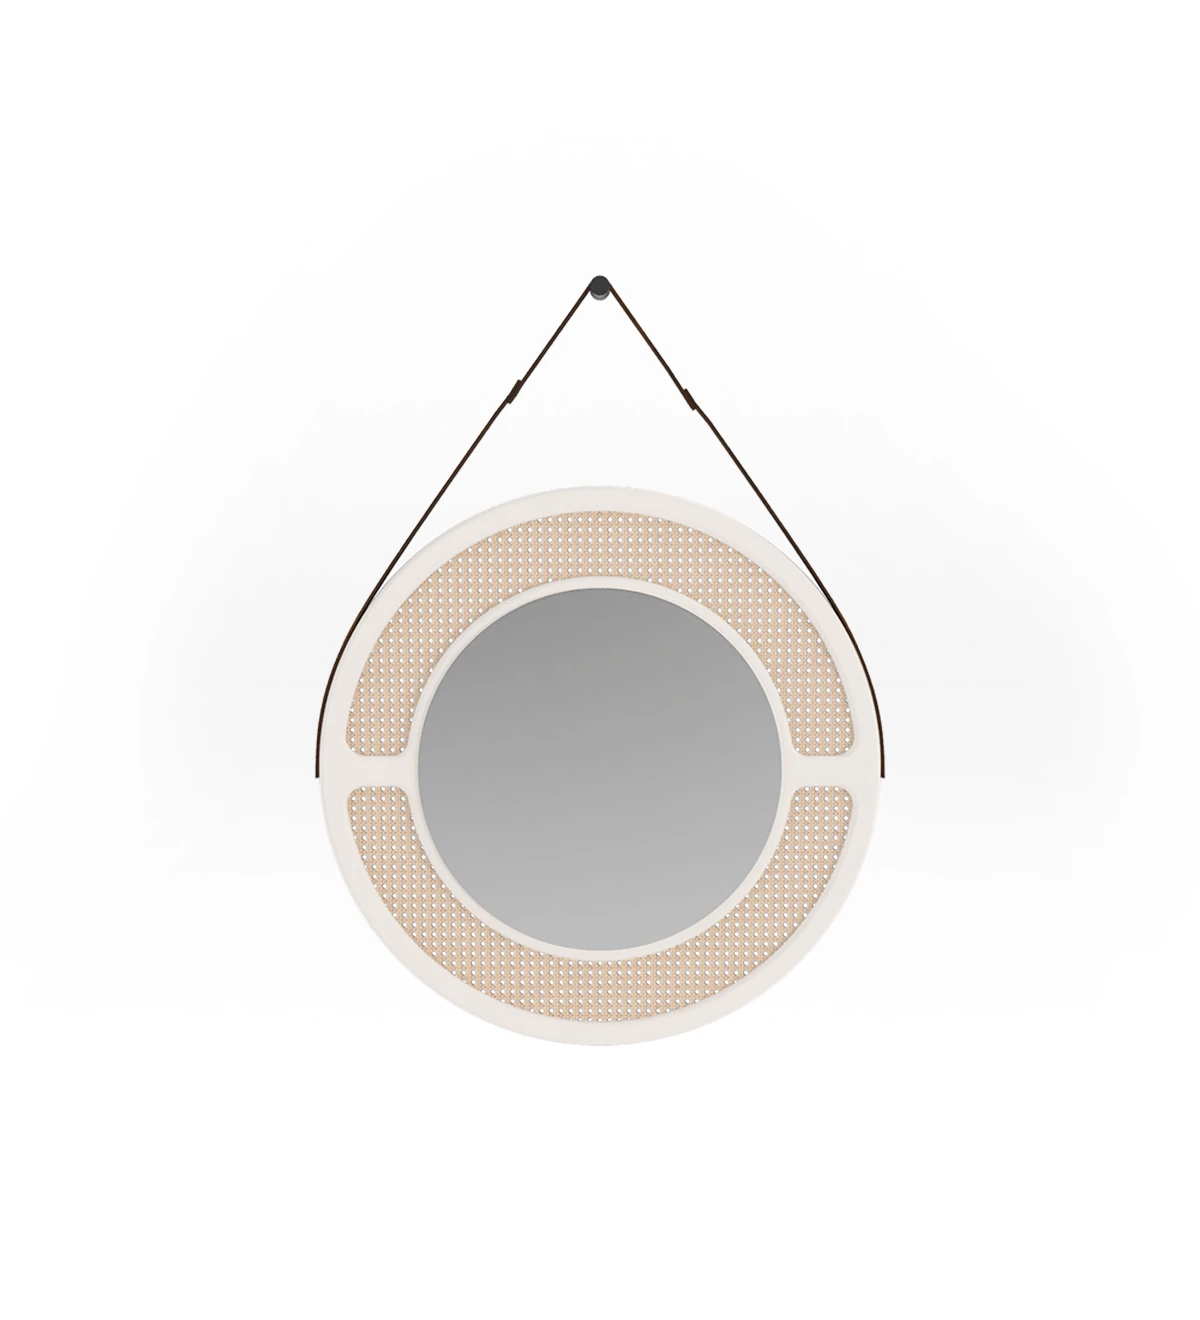 Round mirror, with pearl lacquered frame, rattan detail.